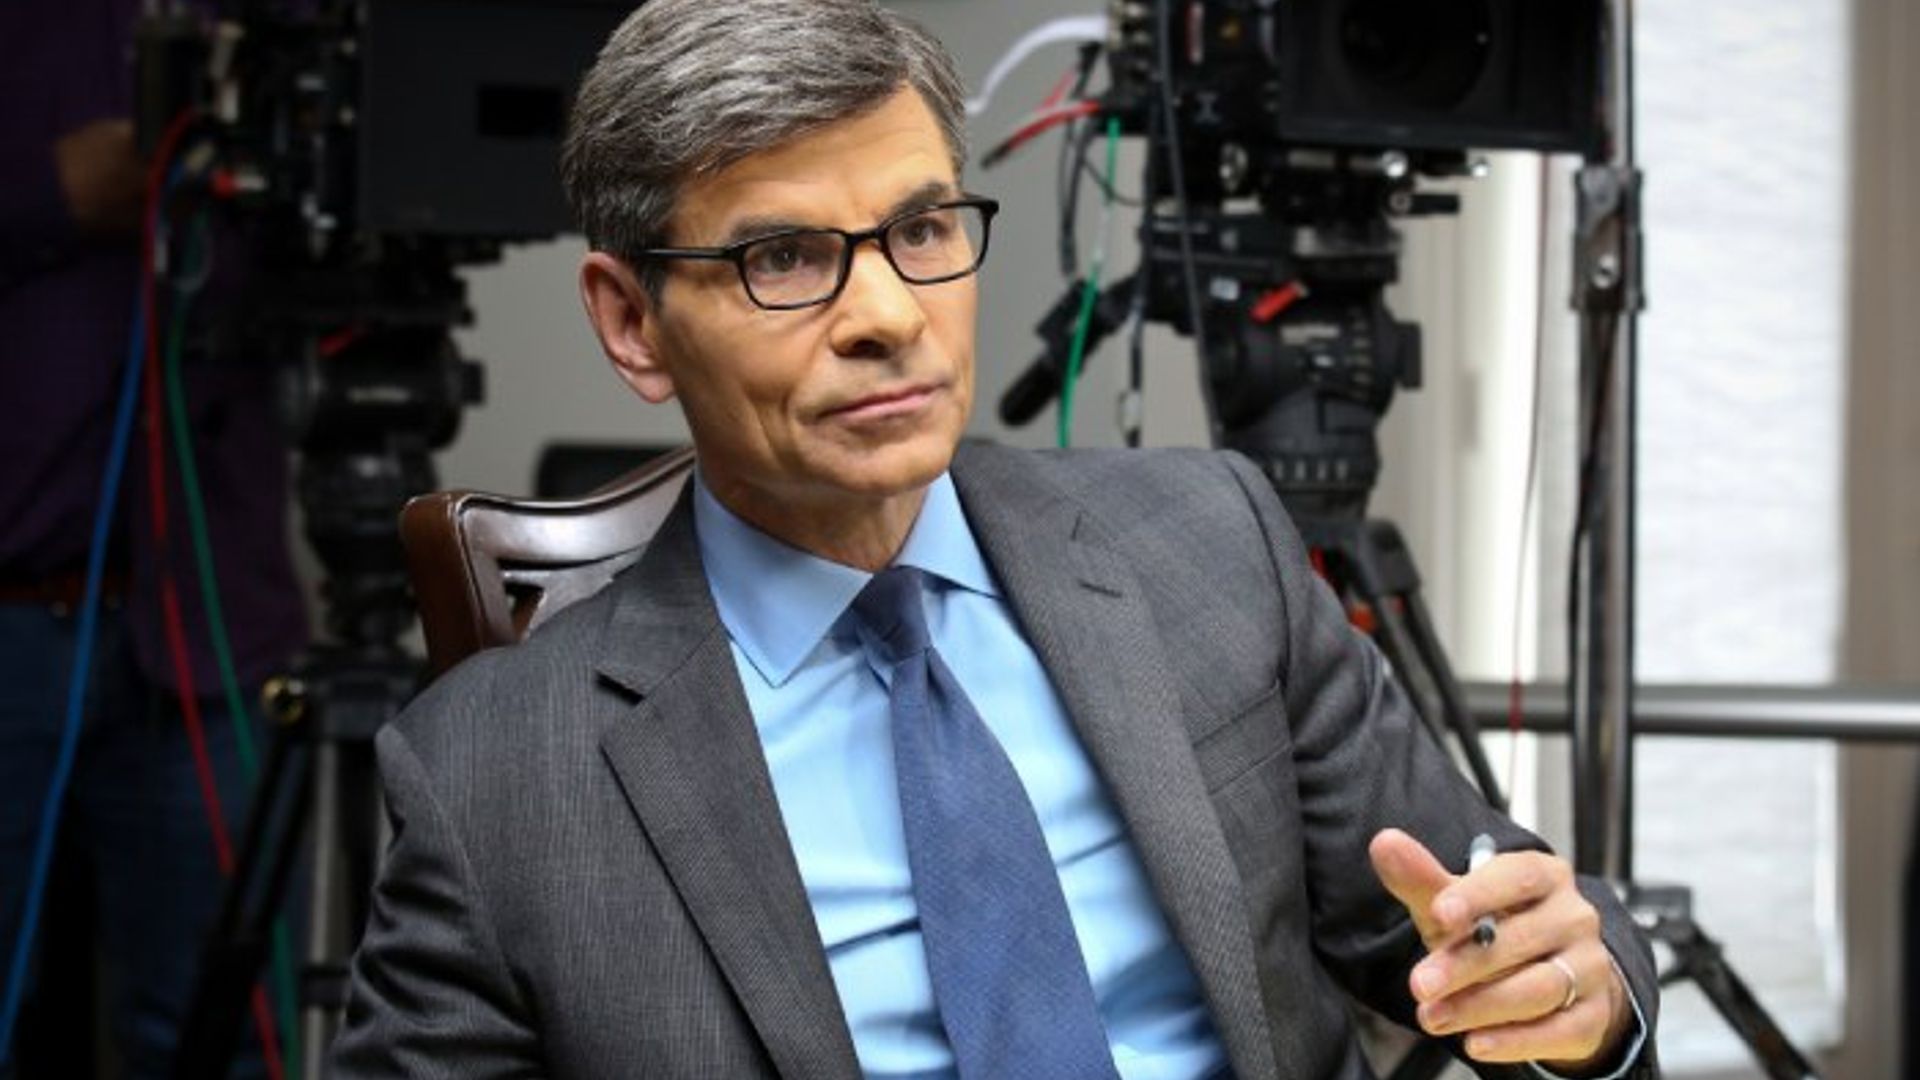 gma george stephanopoulos heartbreaking loss